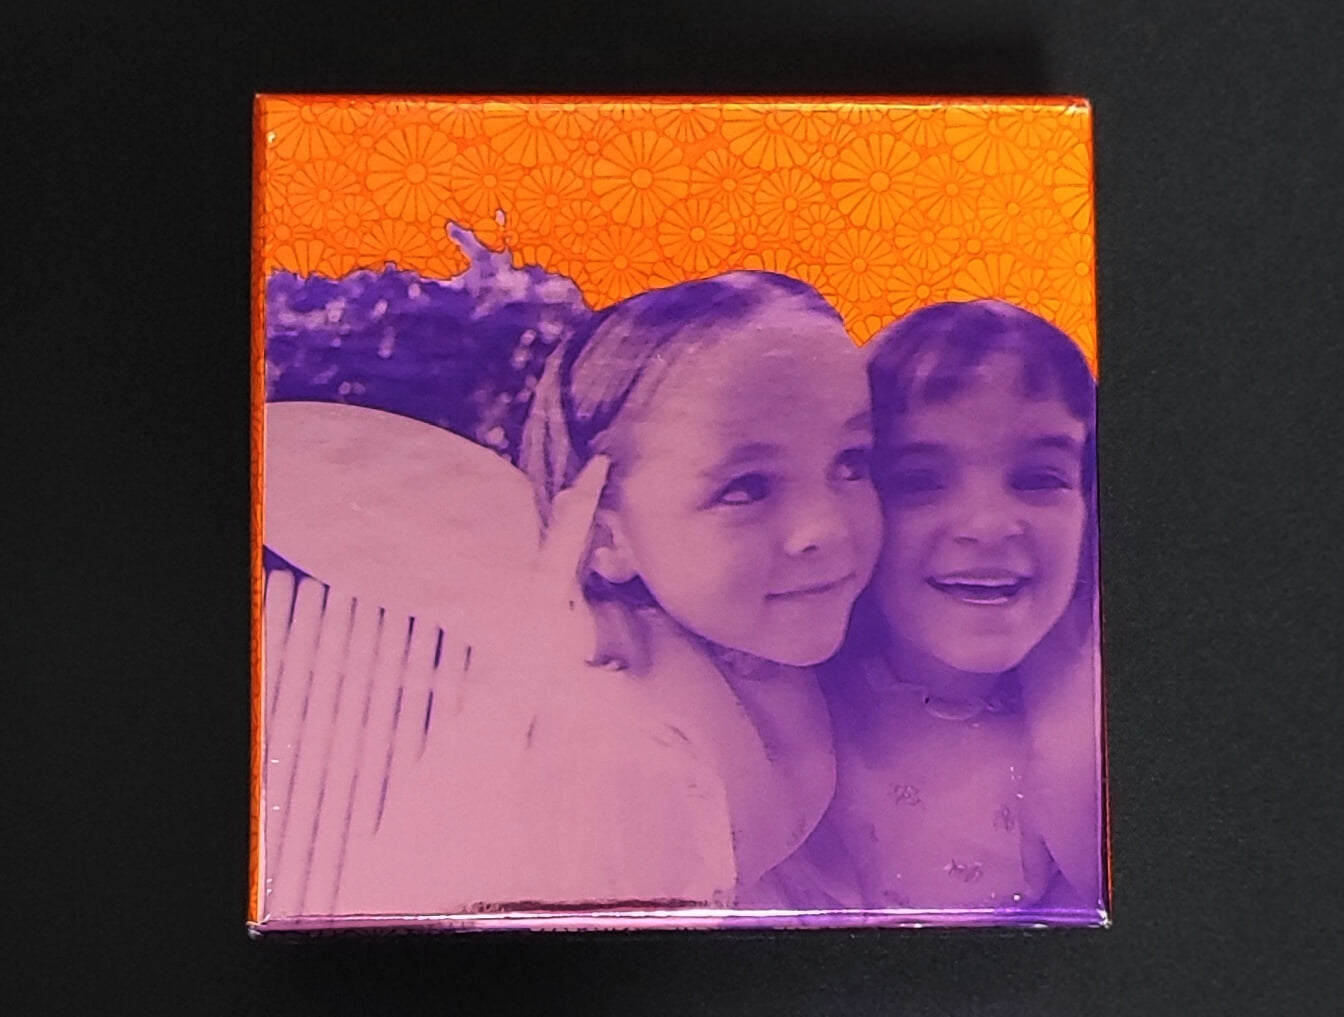 Smashing Pumpkins - Siamese Dream (Limited Deluxe Edition)